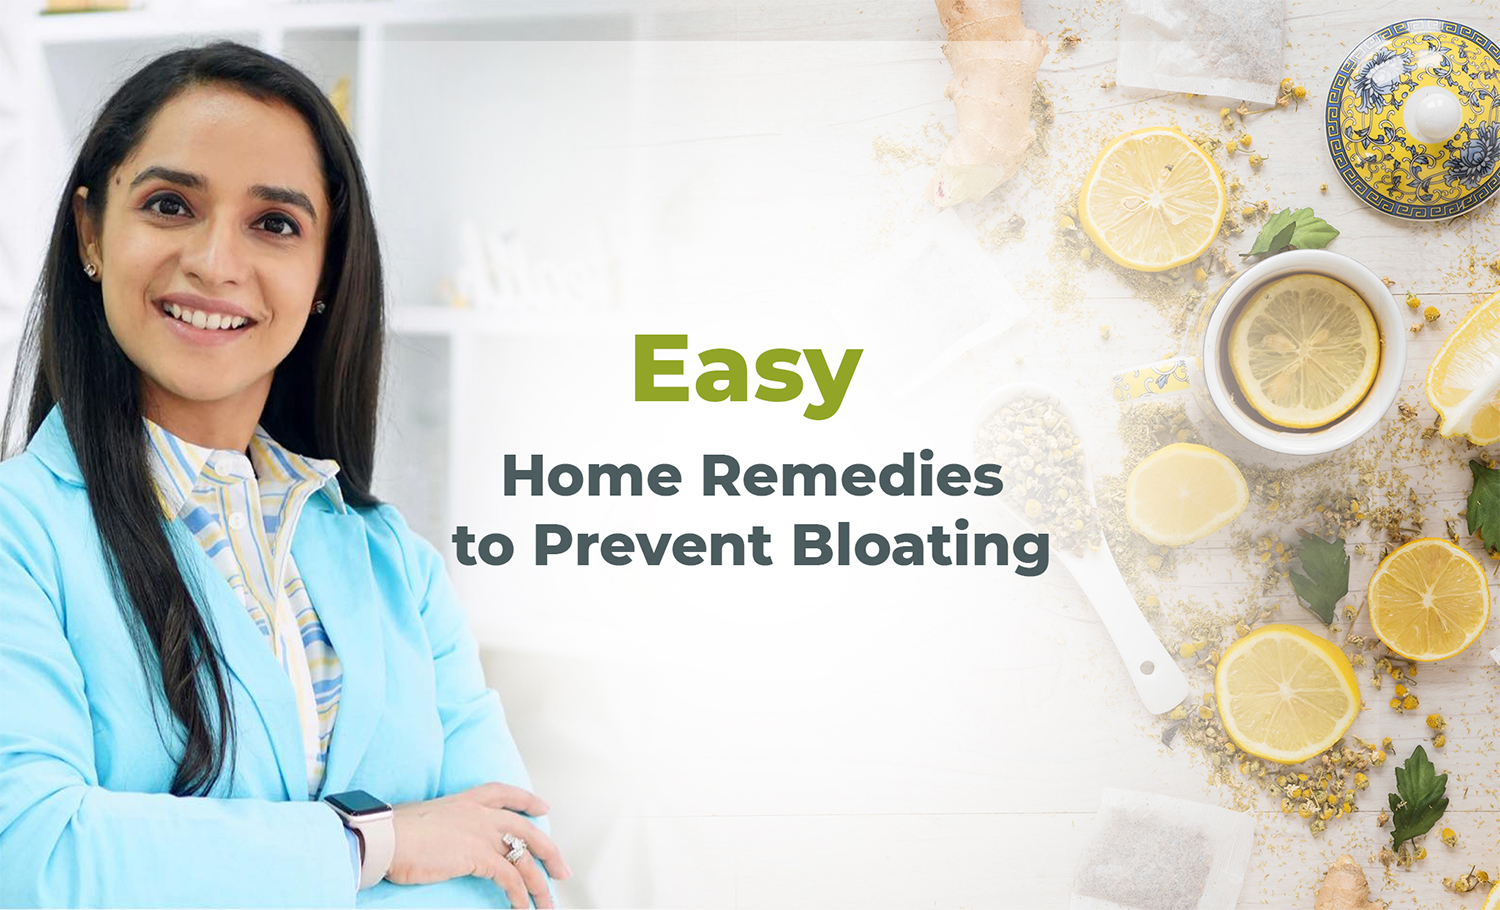 Prevent Bloating Issues with Easy Home Remedies